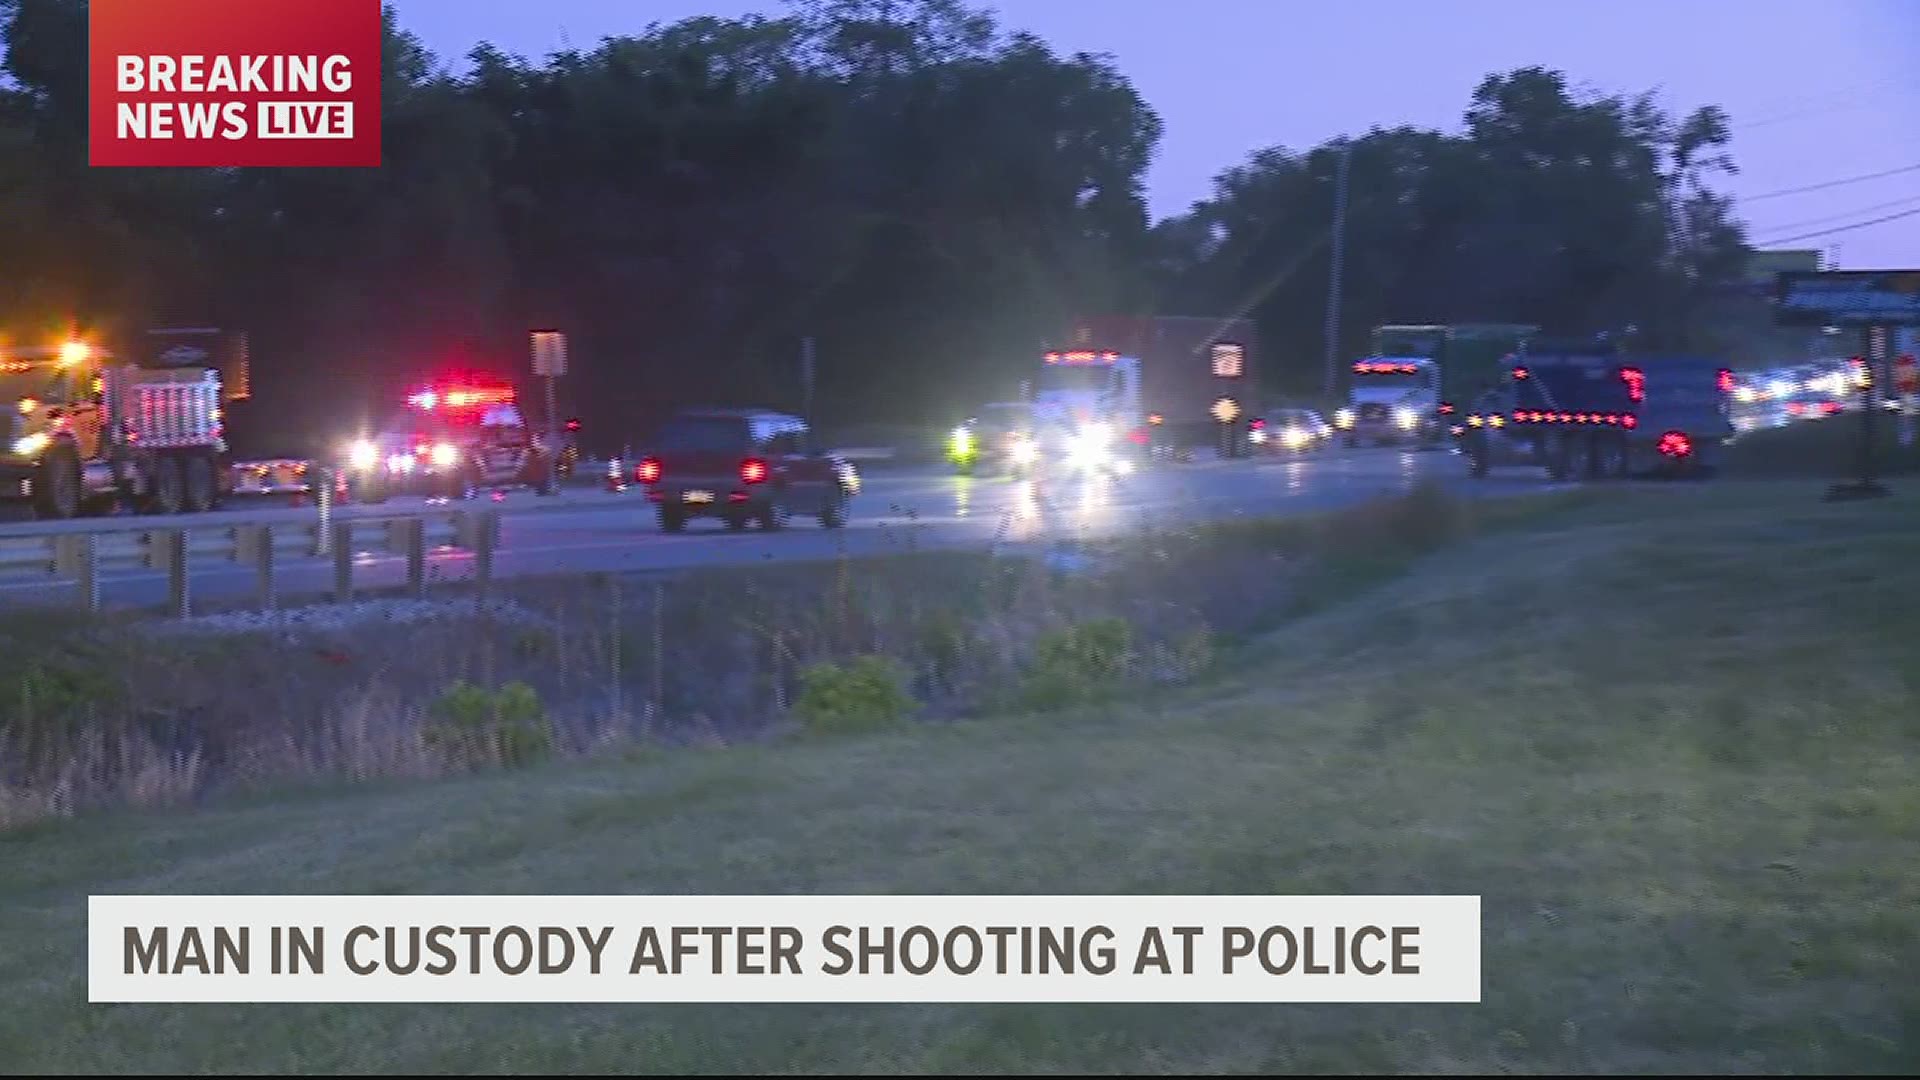 Police say they initiated a traffic stop on an armed suicidal male who then opened fire on officers.